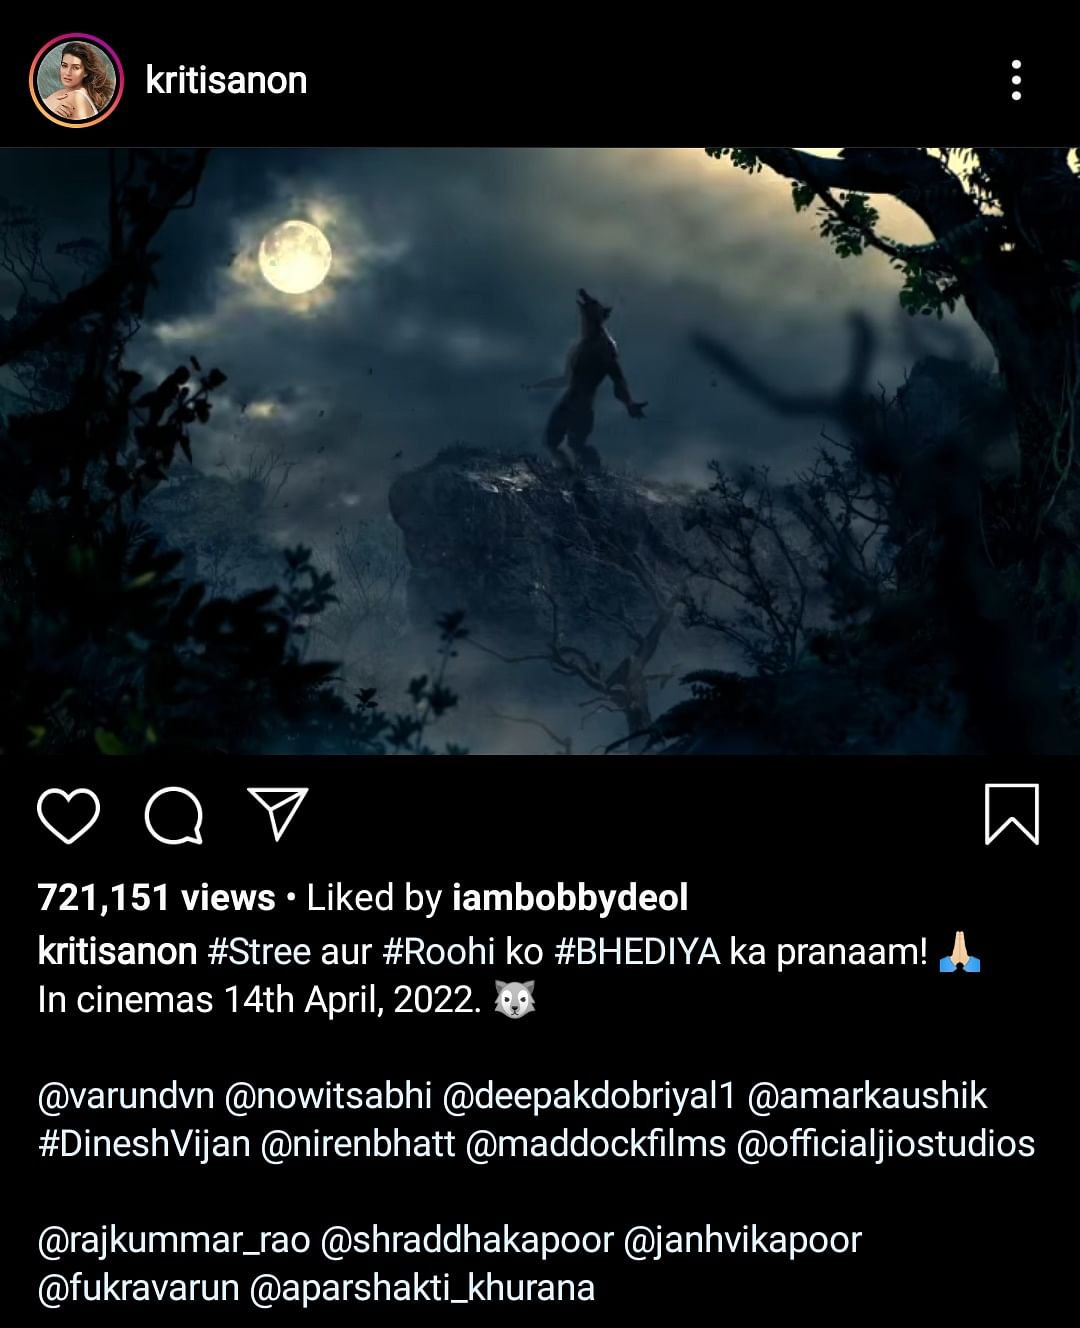 Actors Varun Dhawan and Kriti Sanon share teaser for the upcoming horror flick.